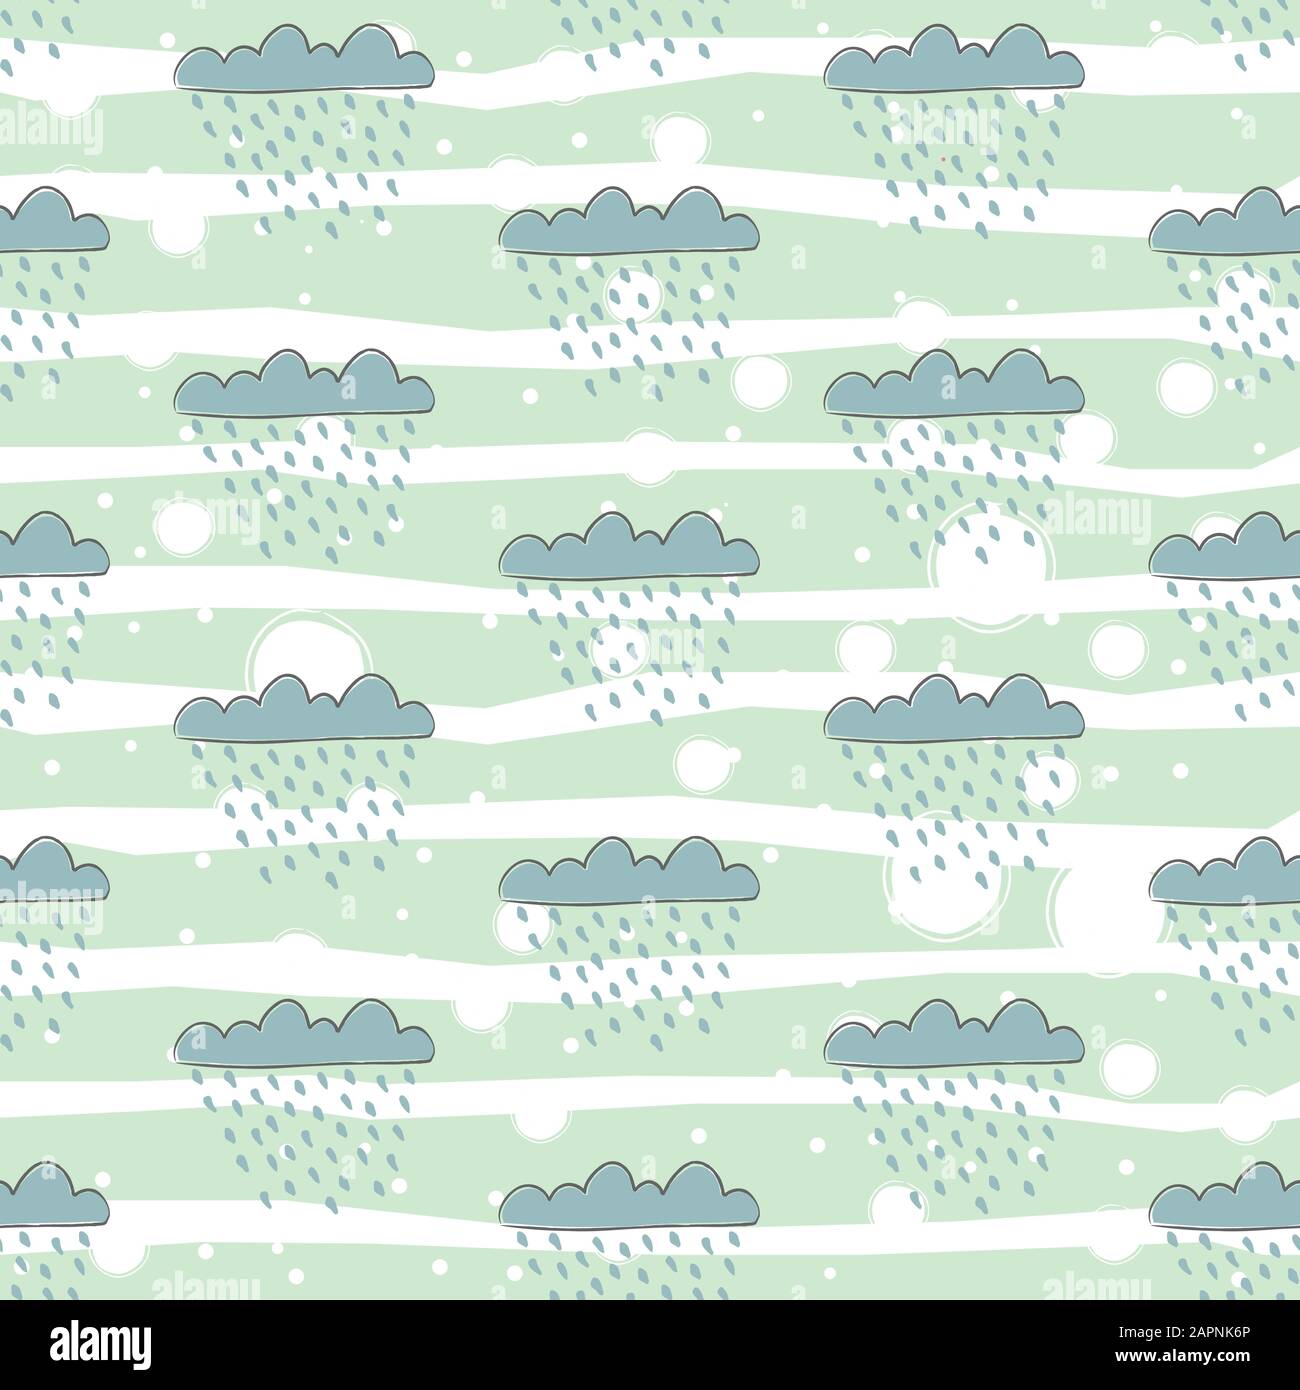 Seamless pattern with cute hand drawn clouds raining on white background. great for swatches, fabric, wall art, wrapping, nappy, etc. Vector Illustrat Stock Vector